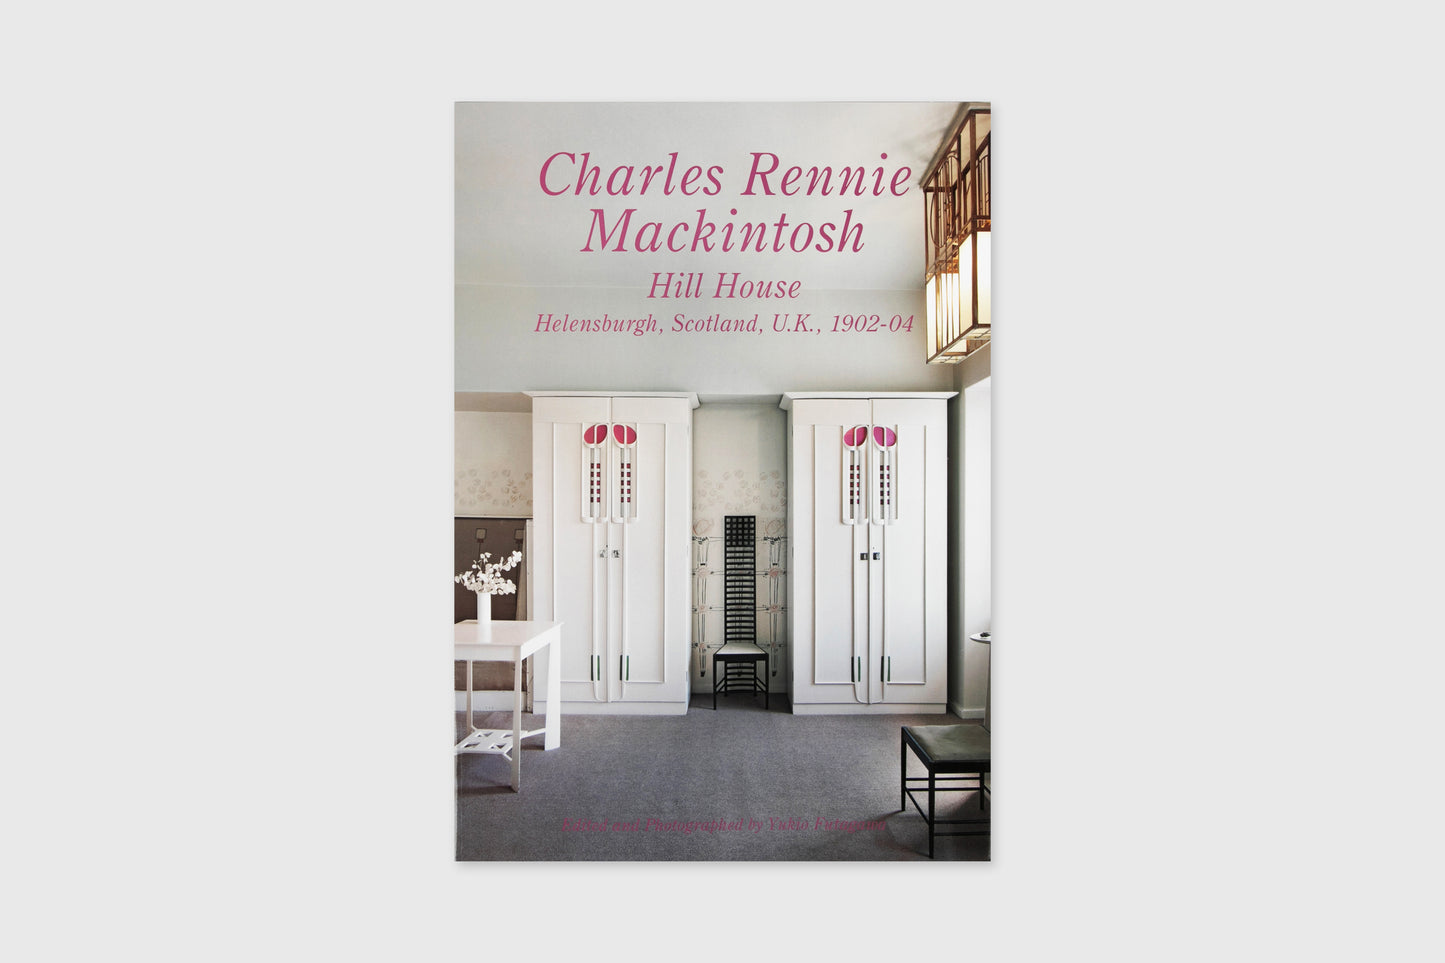 Residential Masterpieces 11: Charles Rennie Mackintosh - Hill House